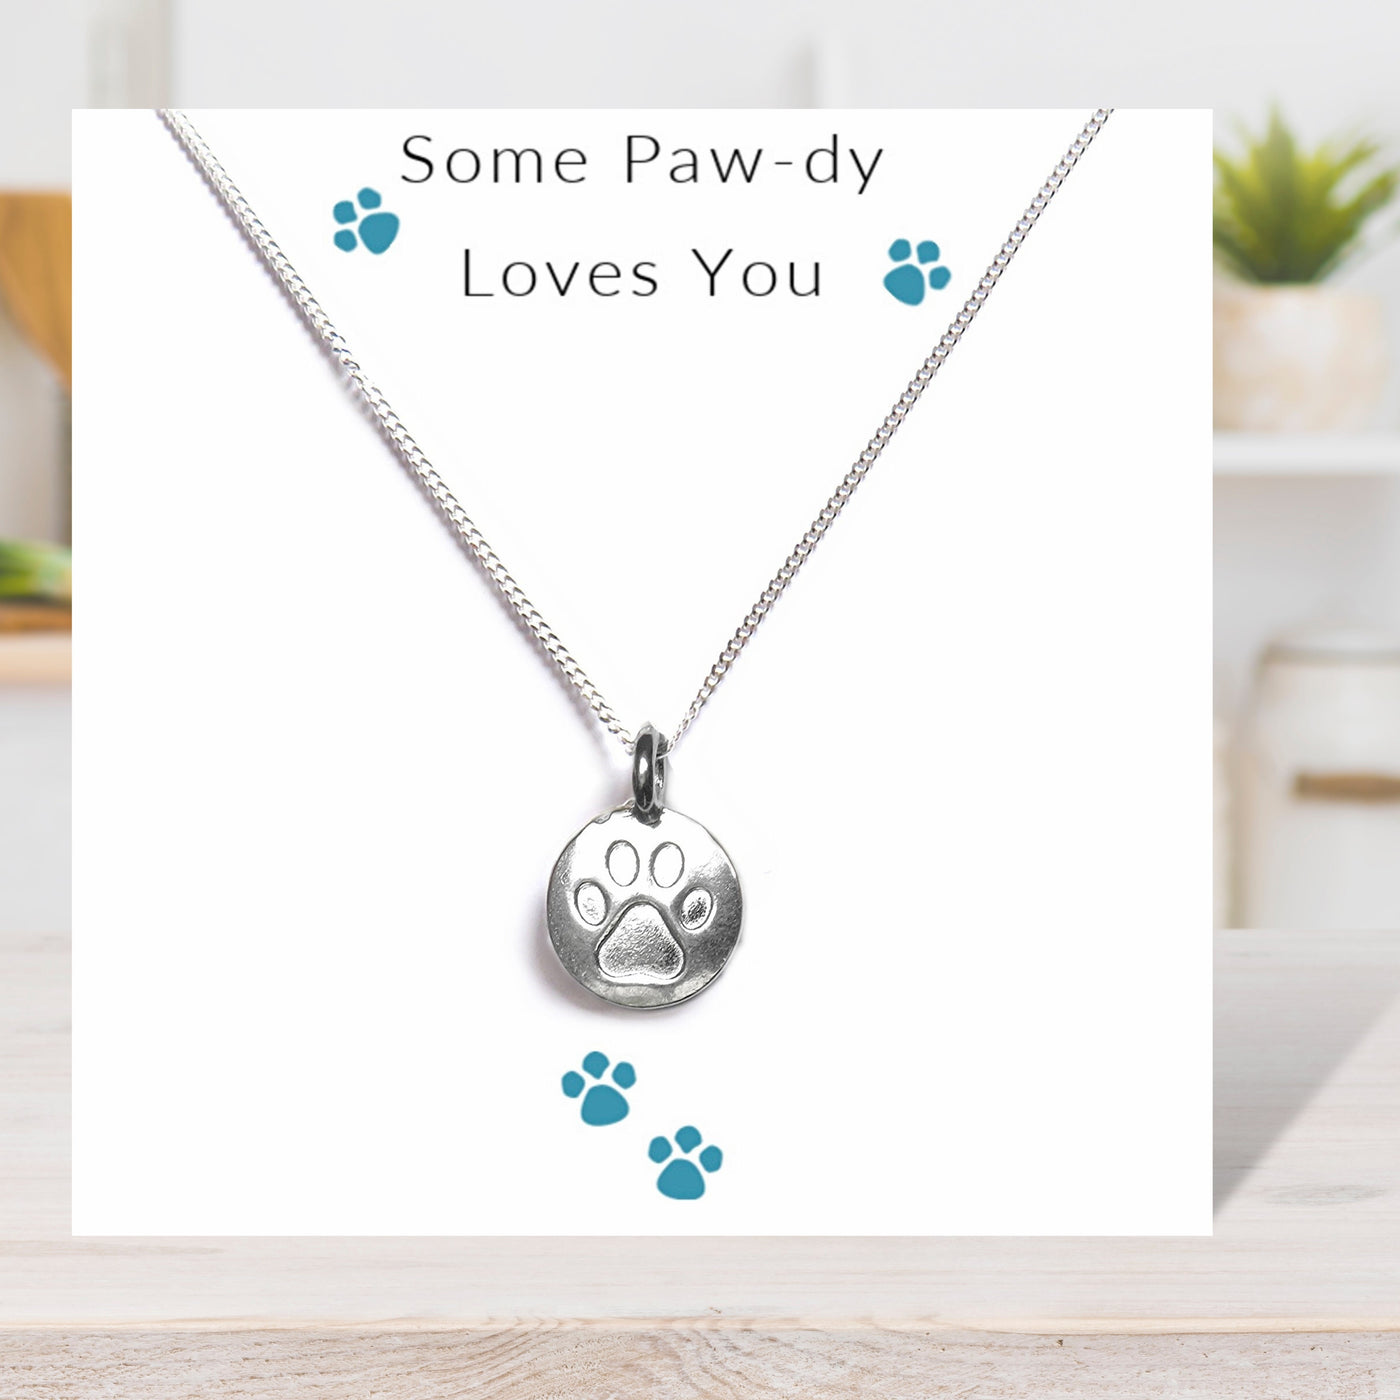 Some Paw-dy Loves You - Necklace on Message Card